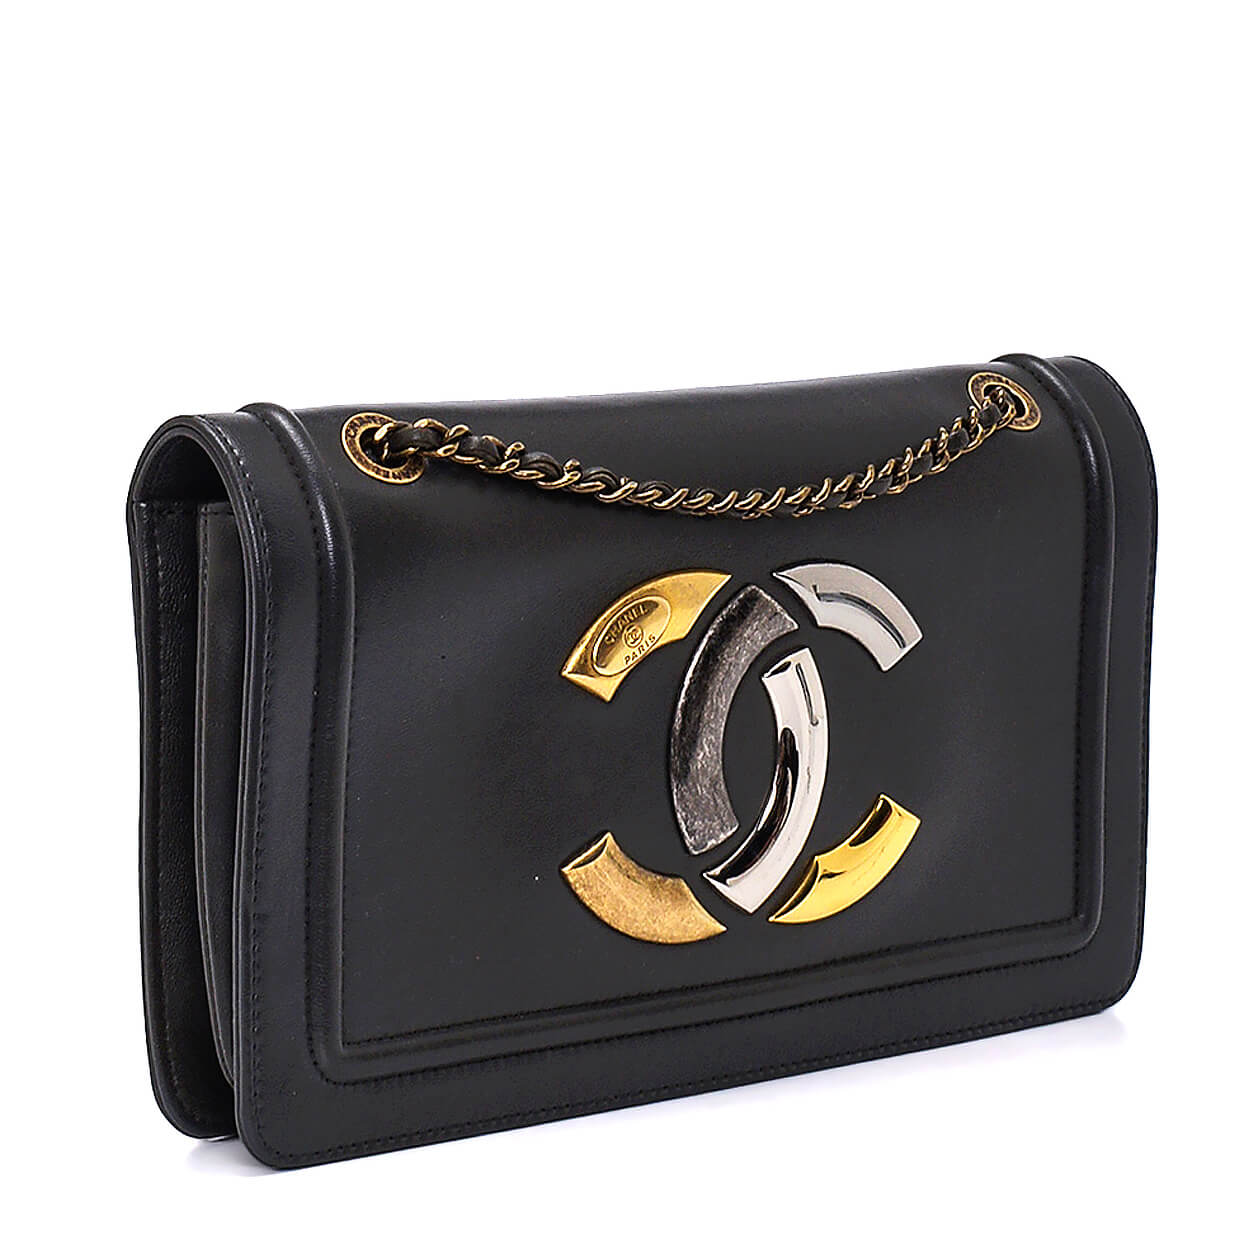 Chanel - Anthracite Leather Block Flap Bag